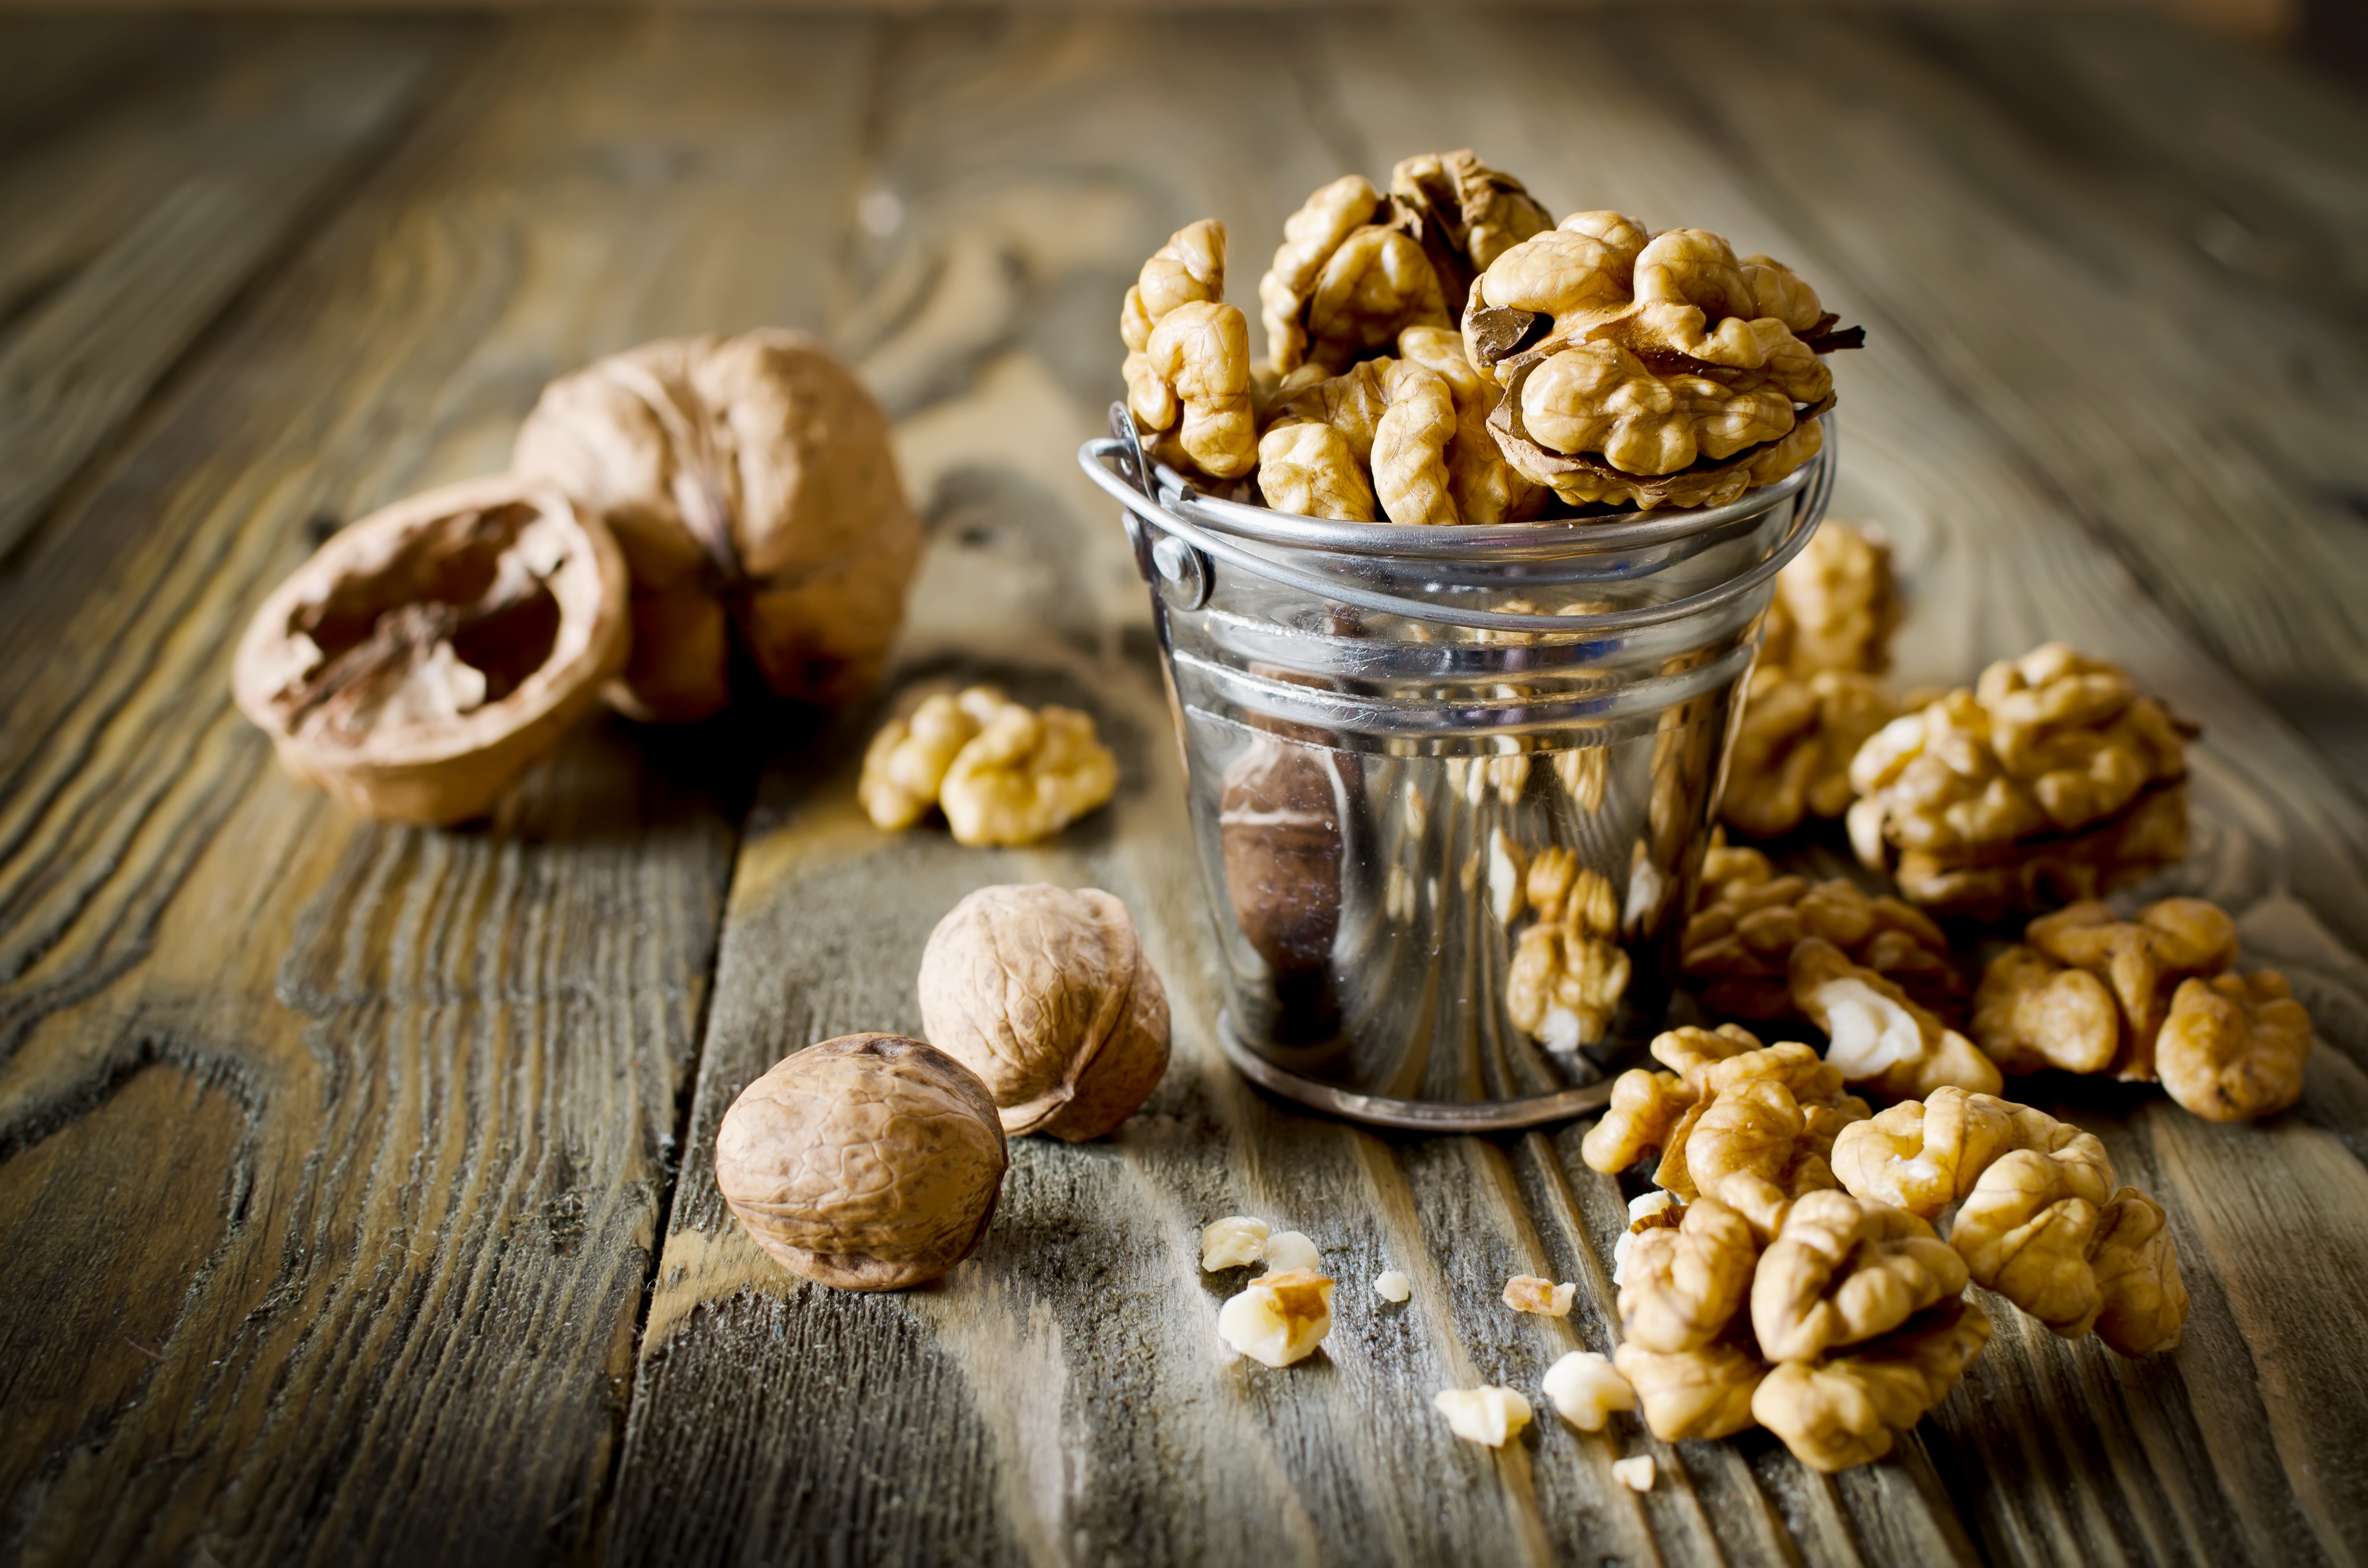 Walnut kernels and whole walnuts on wooden table. Selective Focus